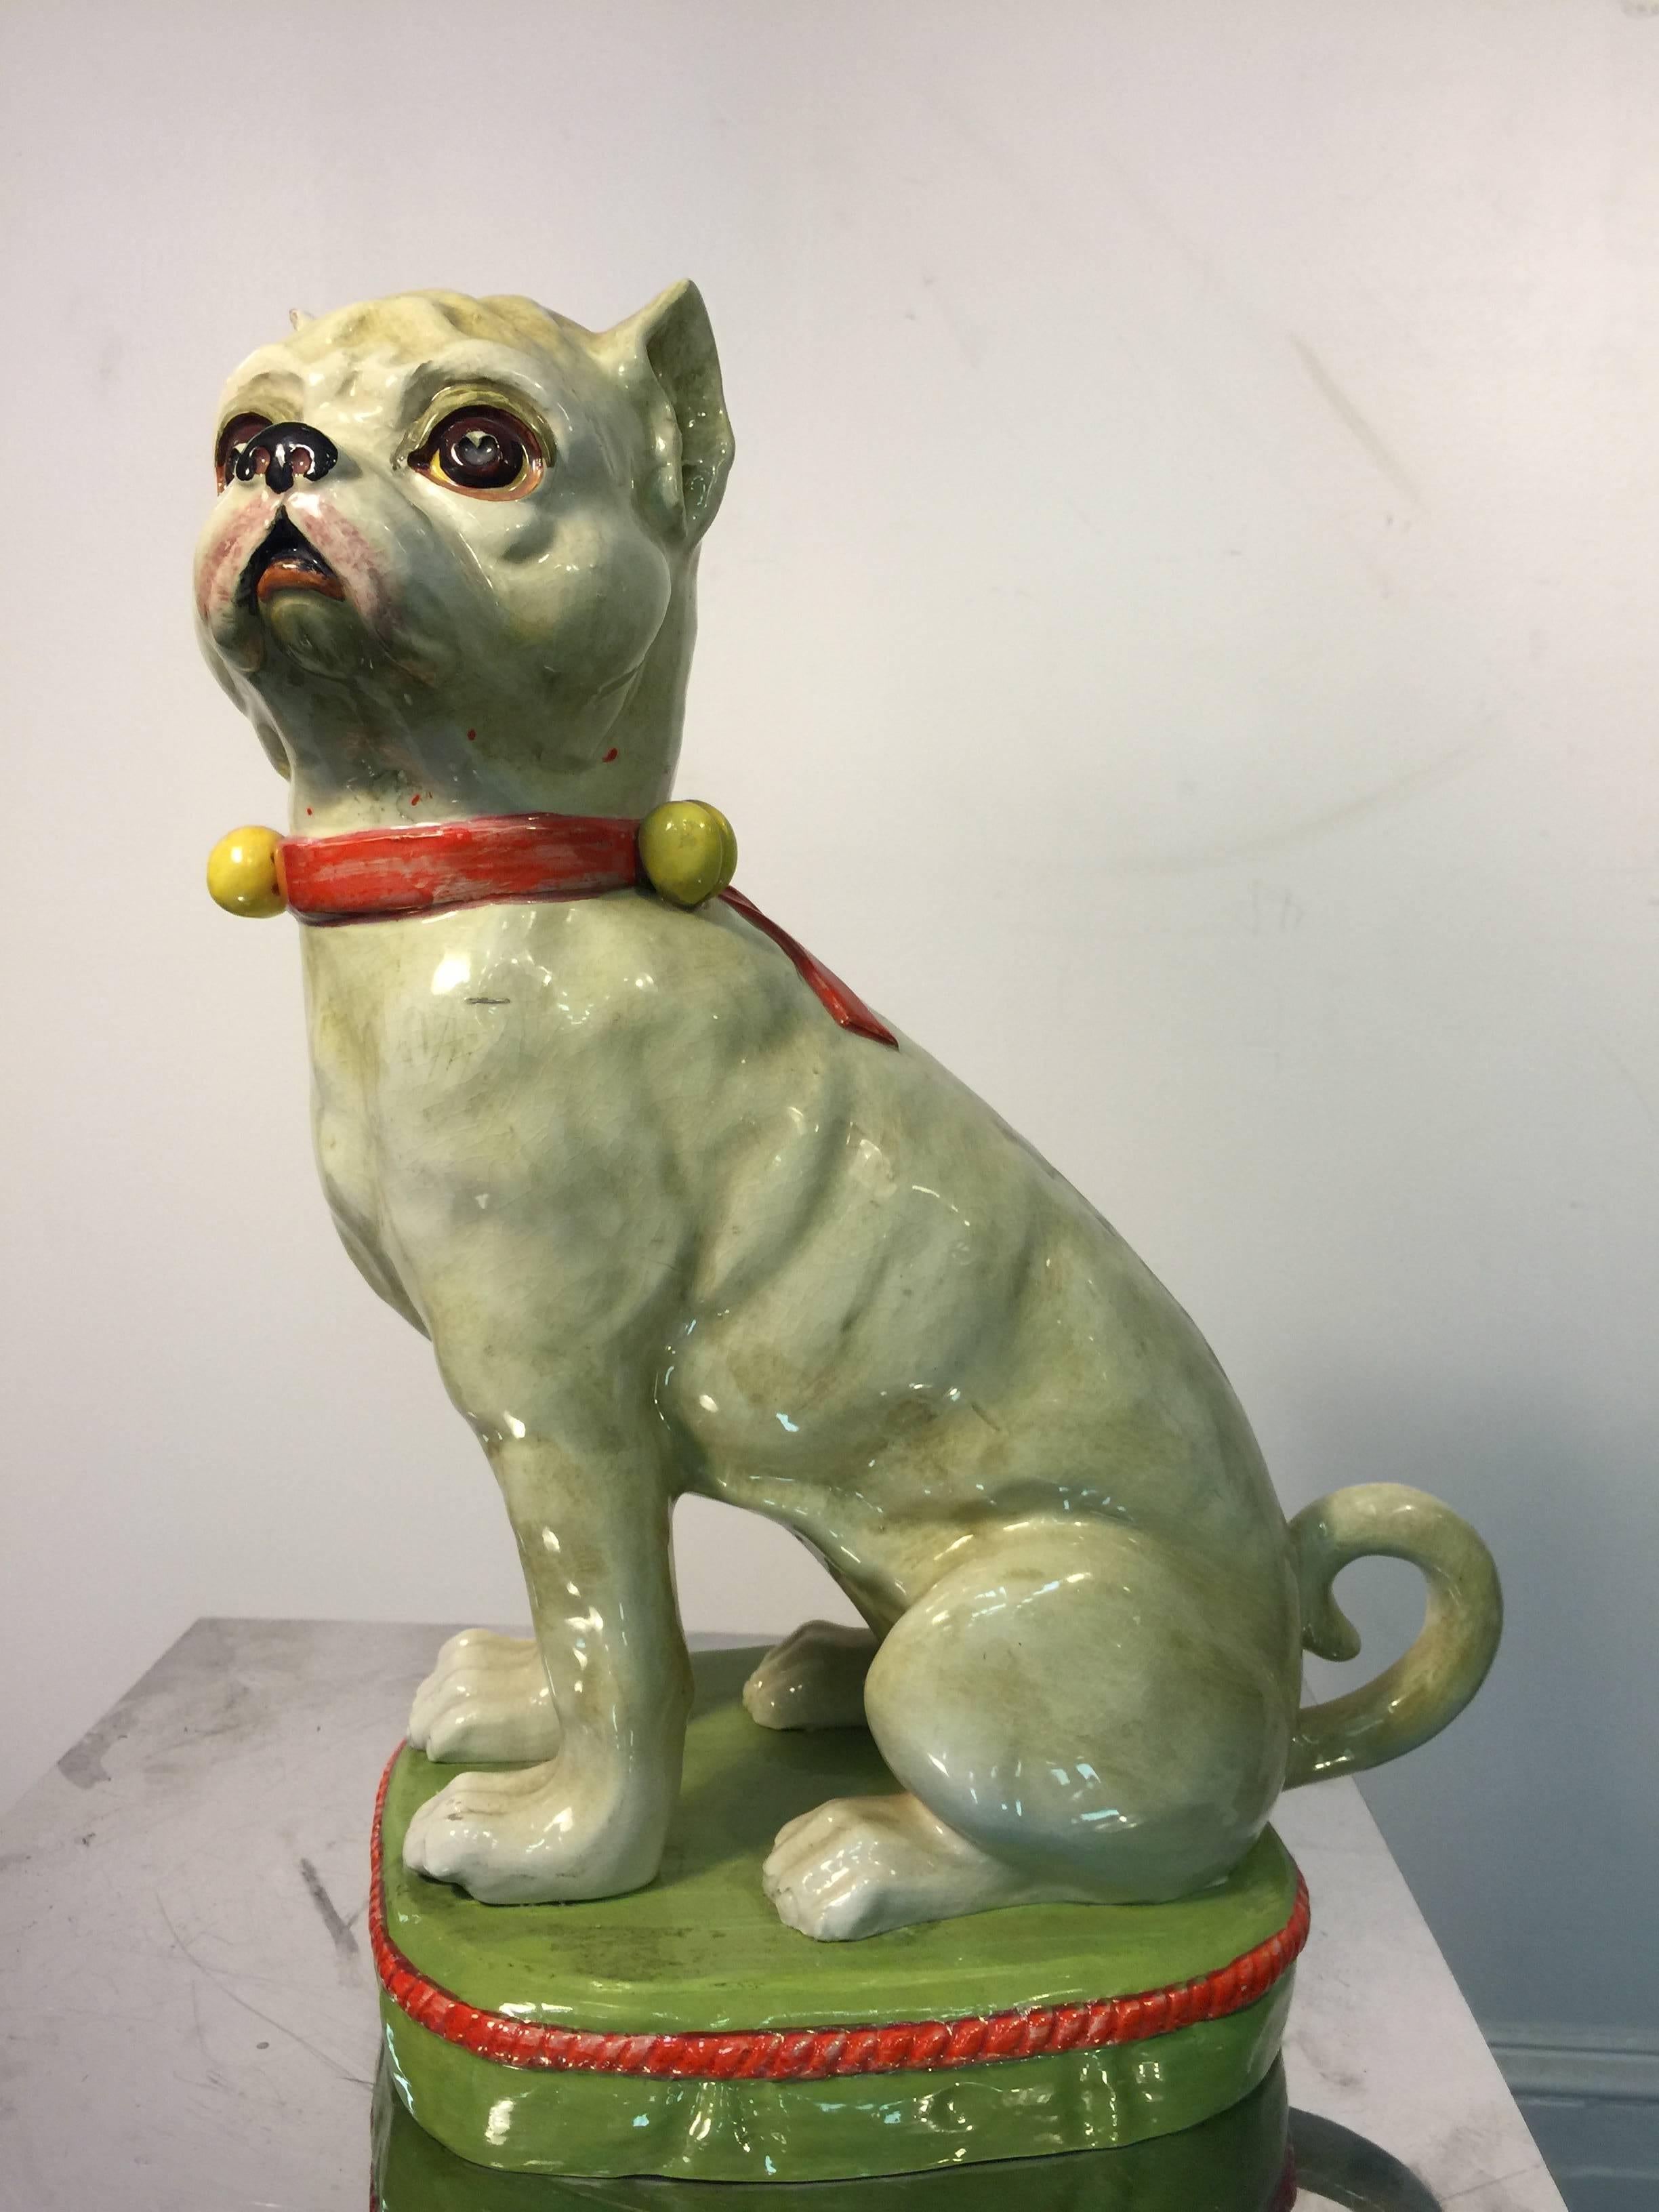 A fantastic pair of Italian hand-painted ceramic sculptural French bulldogs, circa 1960. Great color and expression.